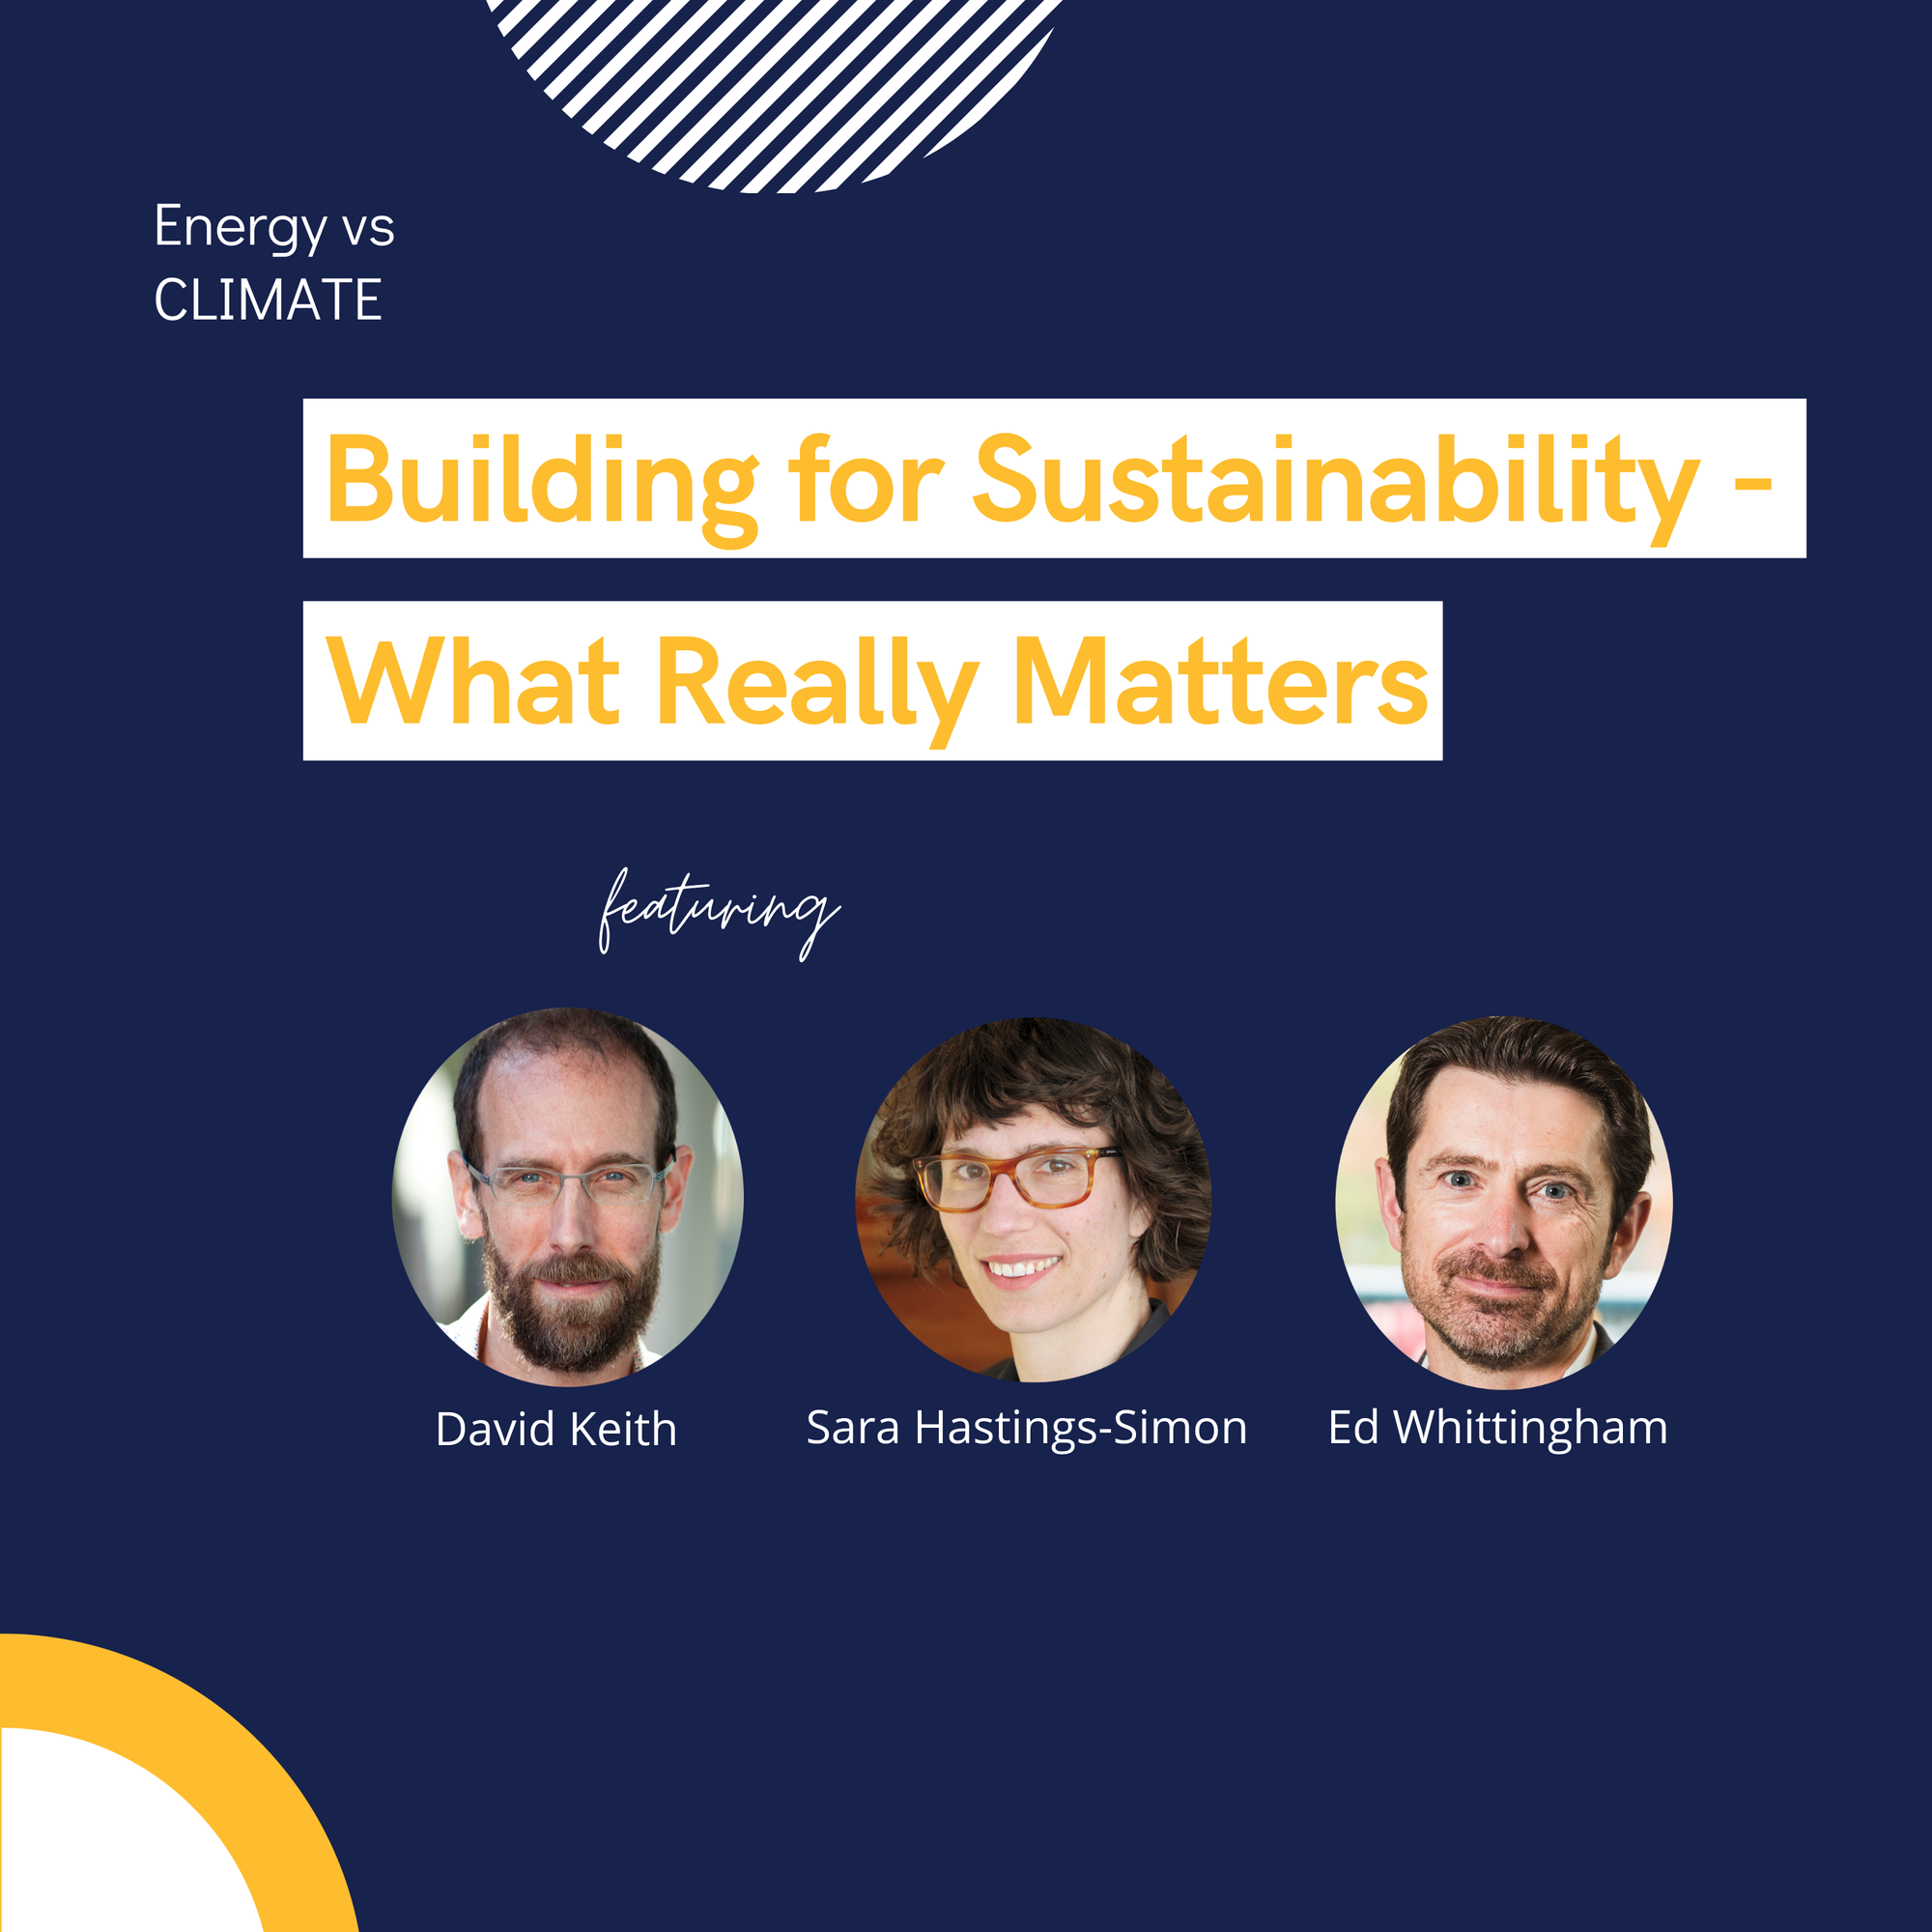 Building for Sustainability - What Really Matters